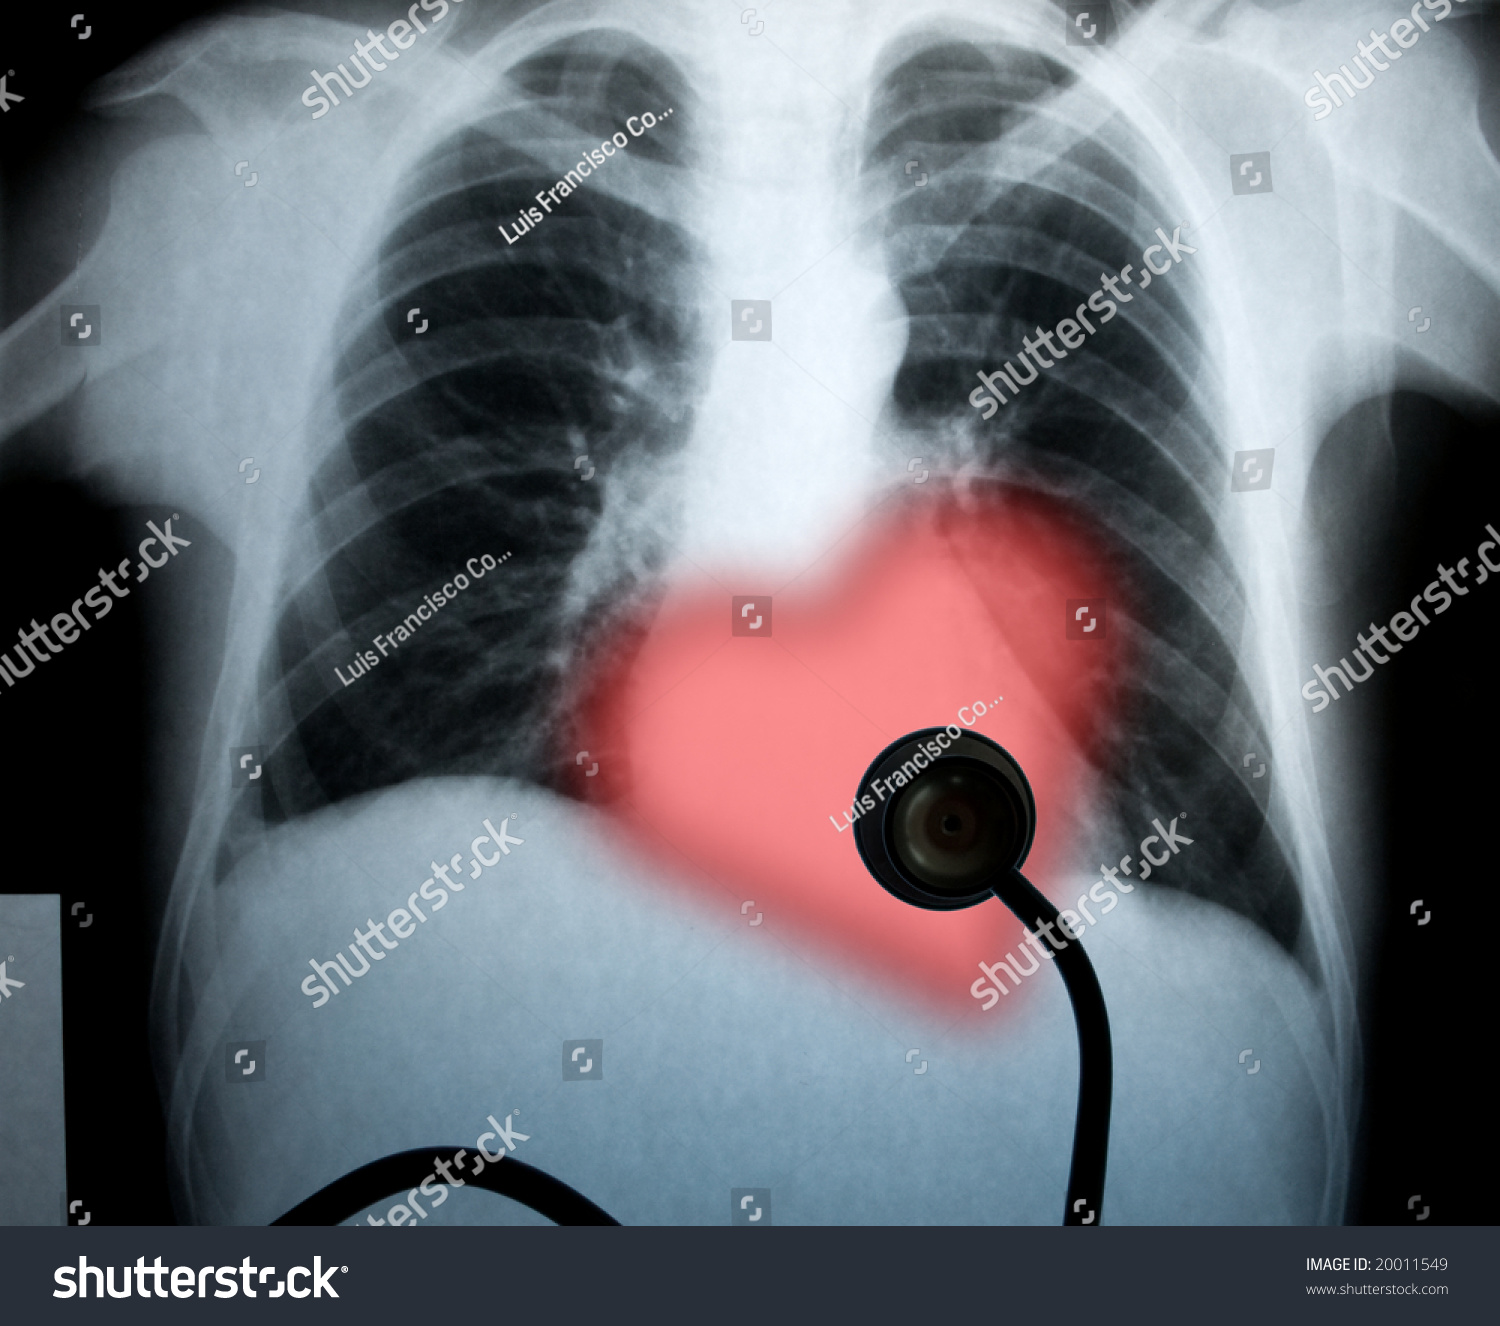 Chest Xray And Heart For Valentines Holiday Stock Photo 20011549 ...